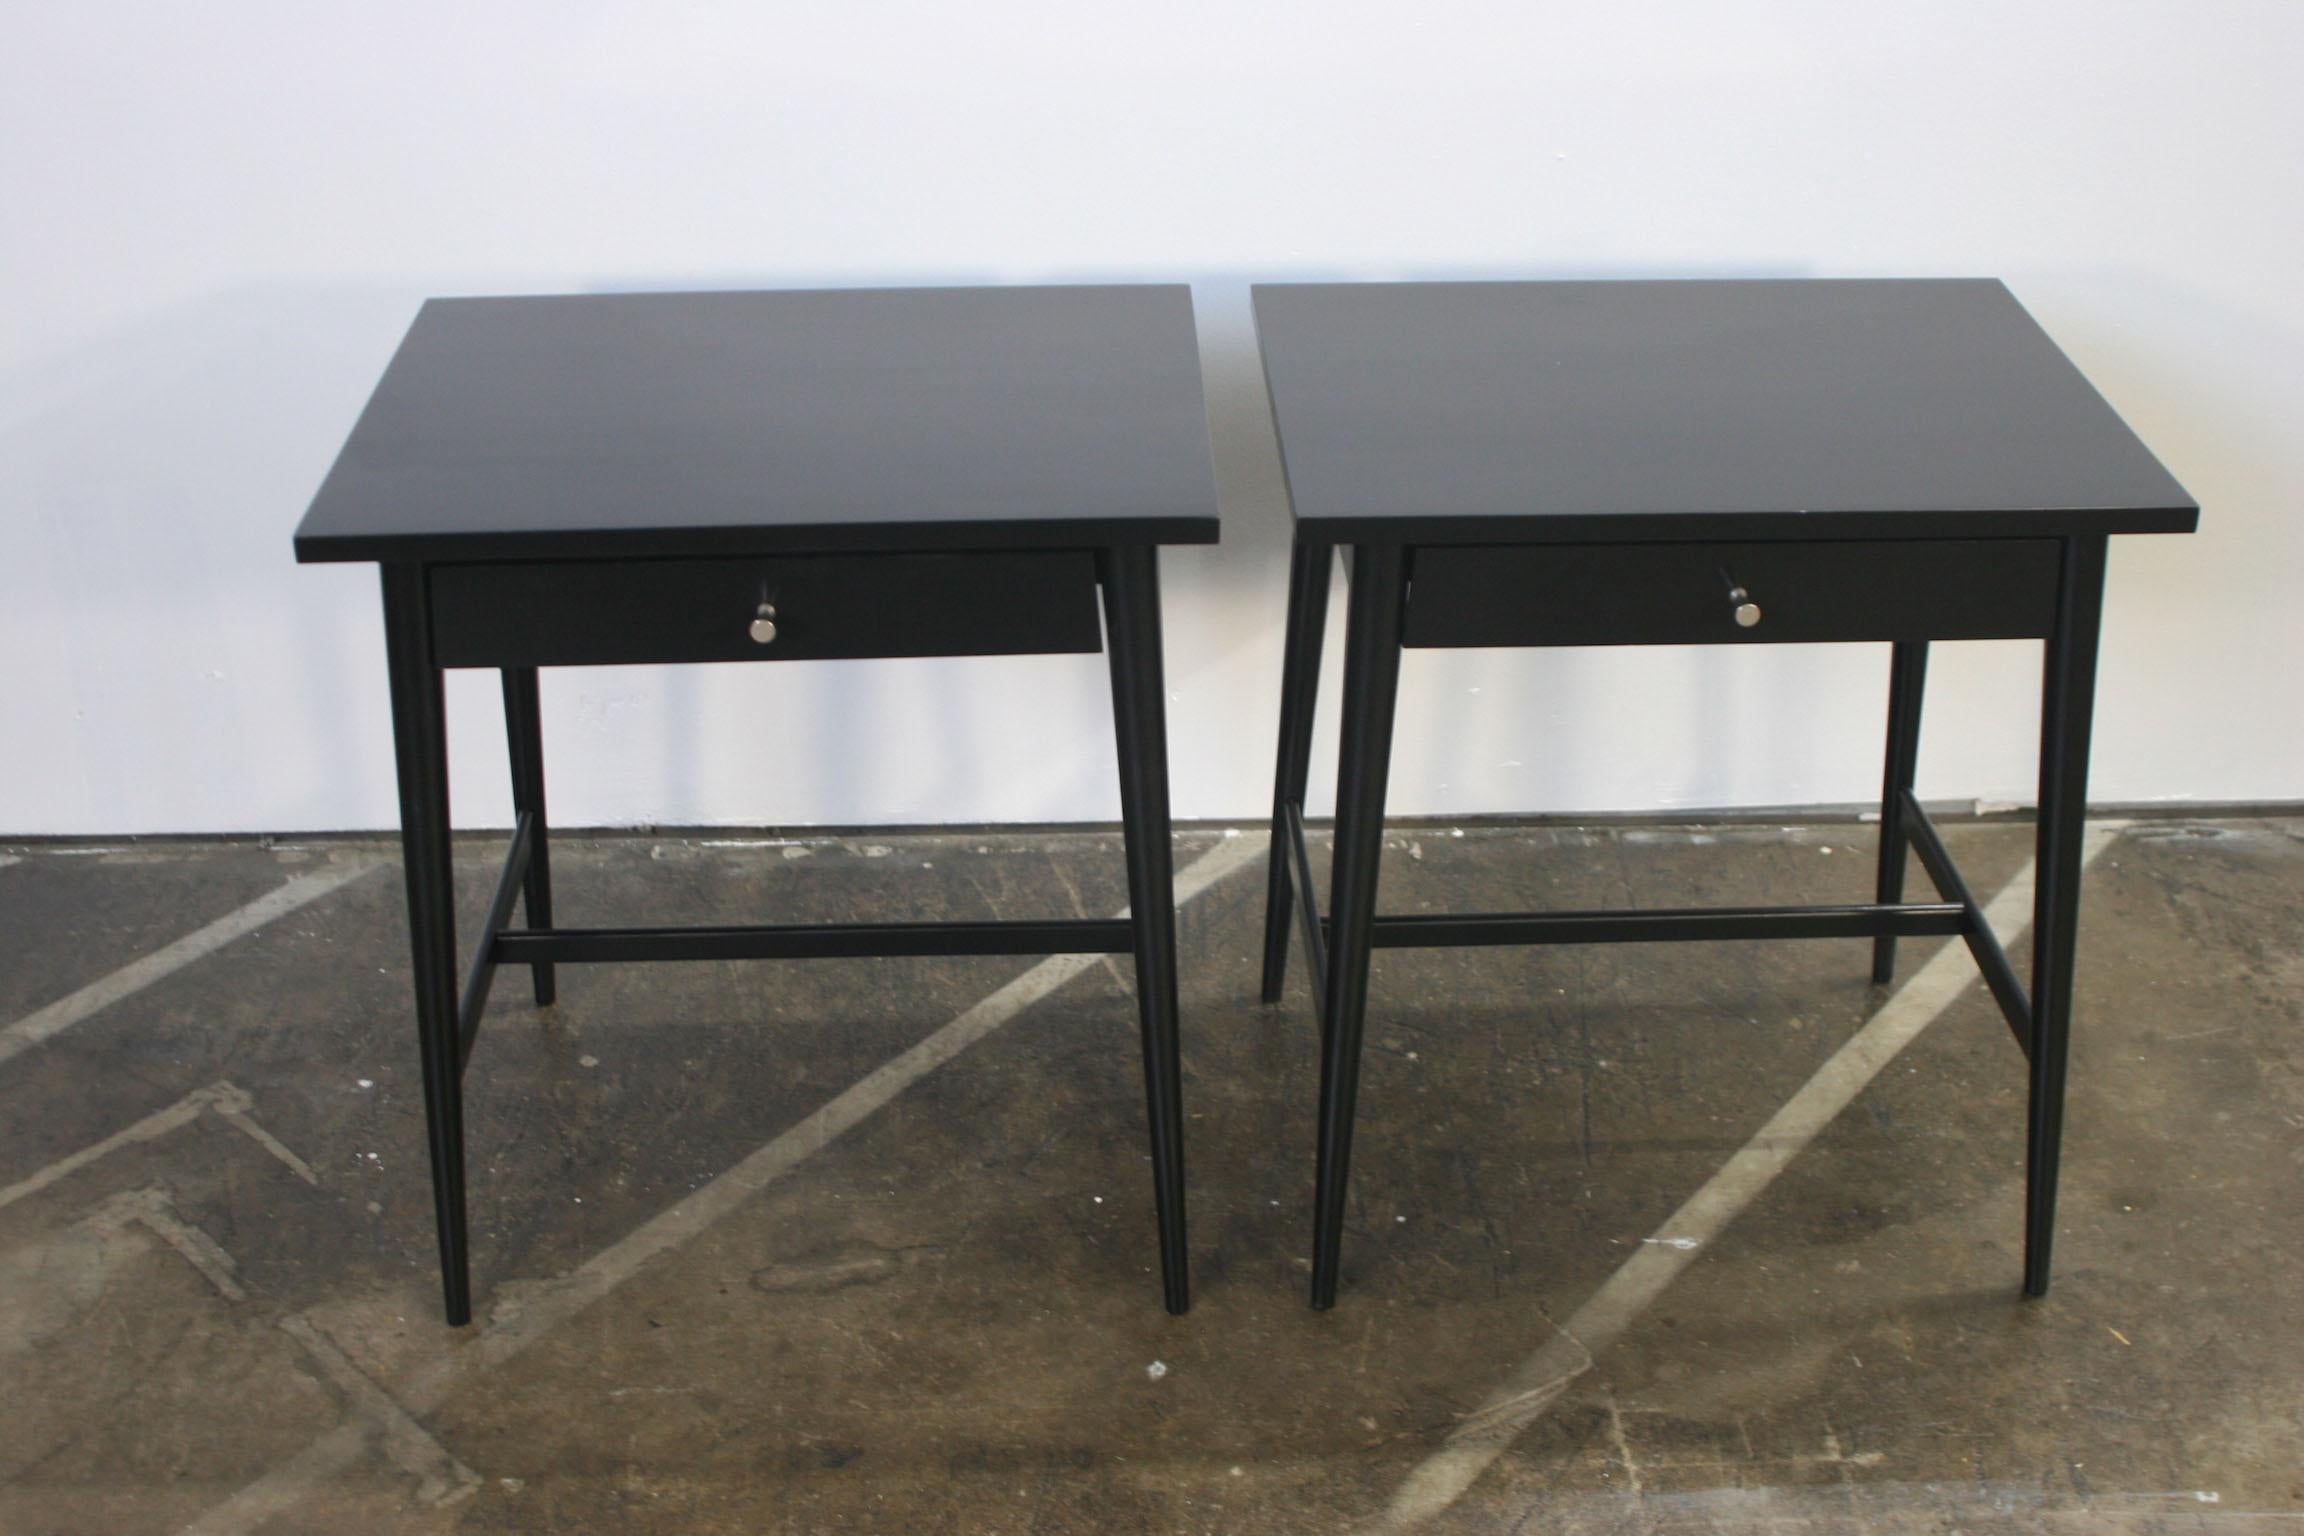 Beautiful pair of Paul McCobb Planner Group #1586 maple nightstands lamp tables single drawer Planner Group nickel knobs Minimalist refinished in Black lacquer - Professionally sprayed. Very delicate designed pair of nightstands with Tapered legs -